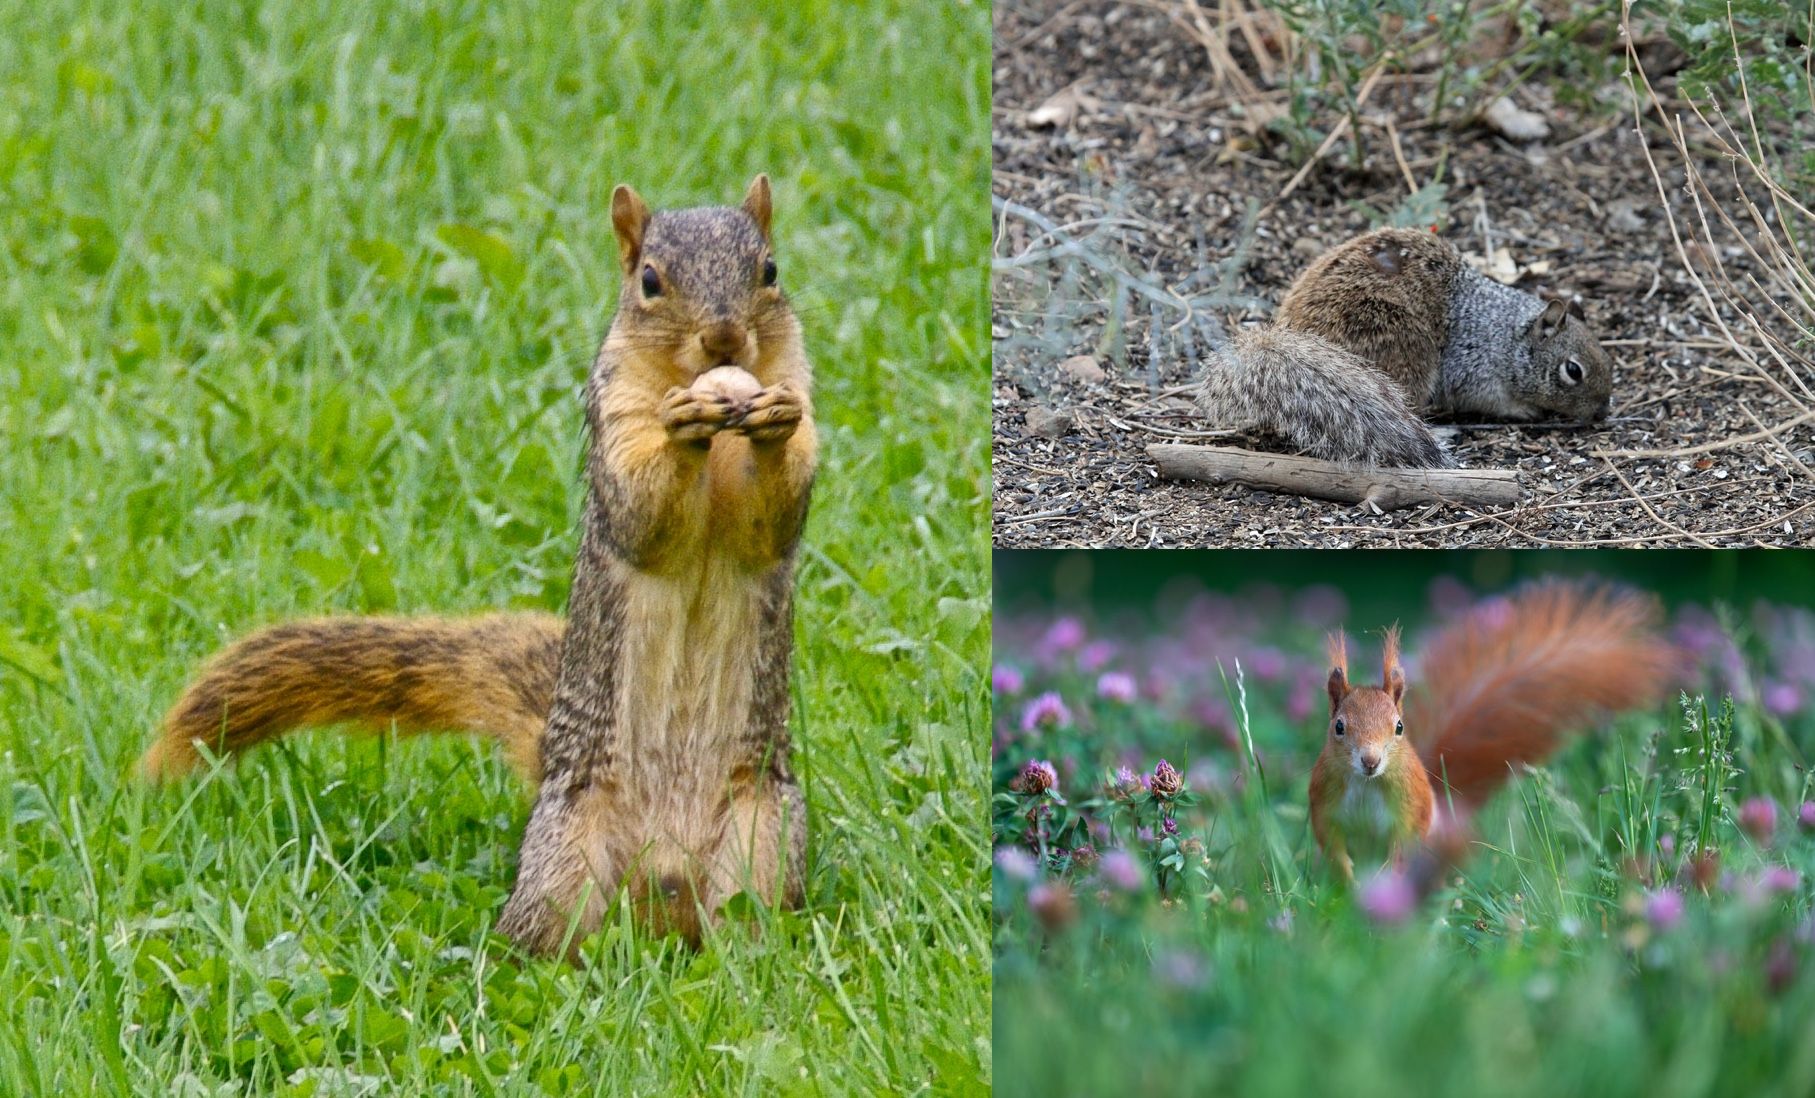 Three images of squirrels returned when querying "field squirrels" on DuckDuckGo